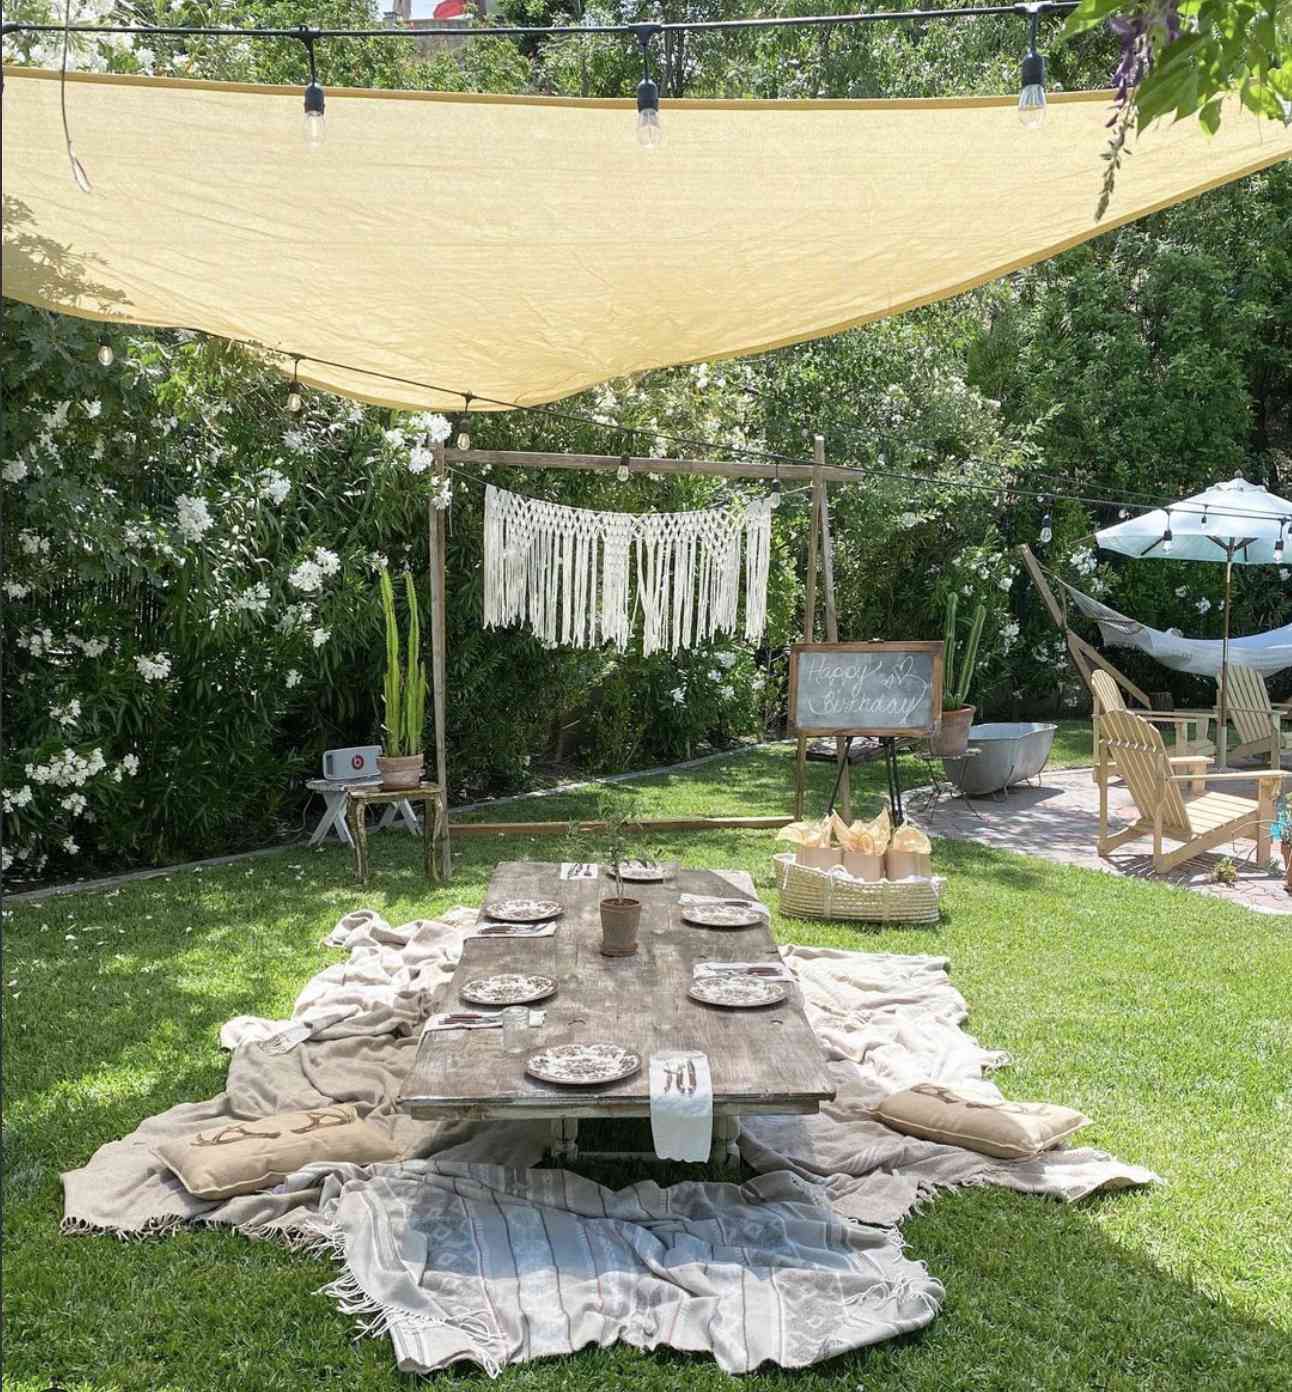 shaded area in backyard with driftwood table